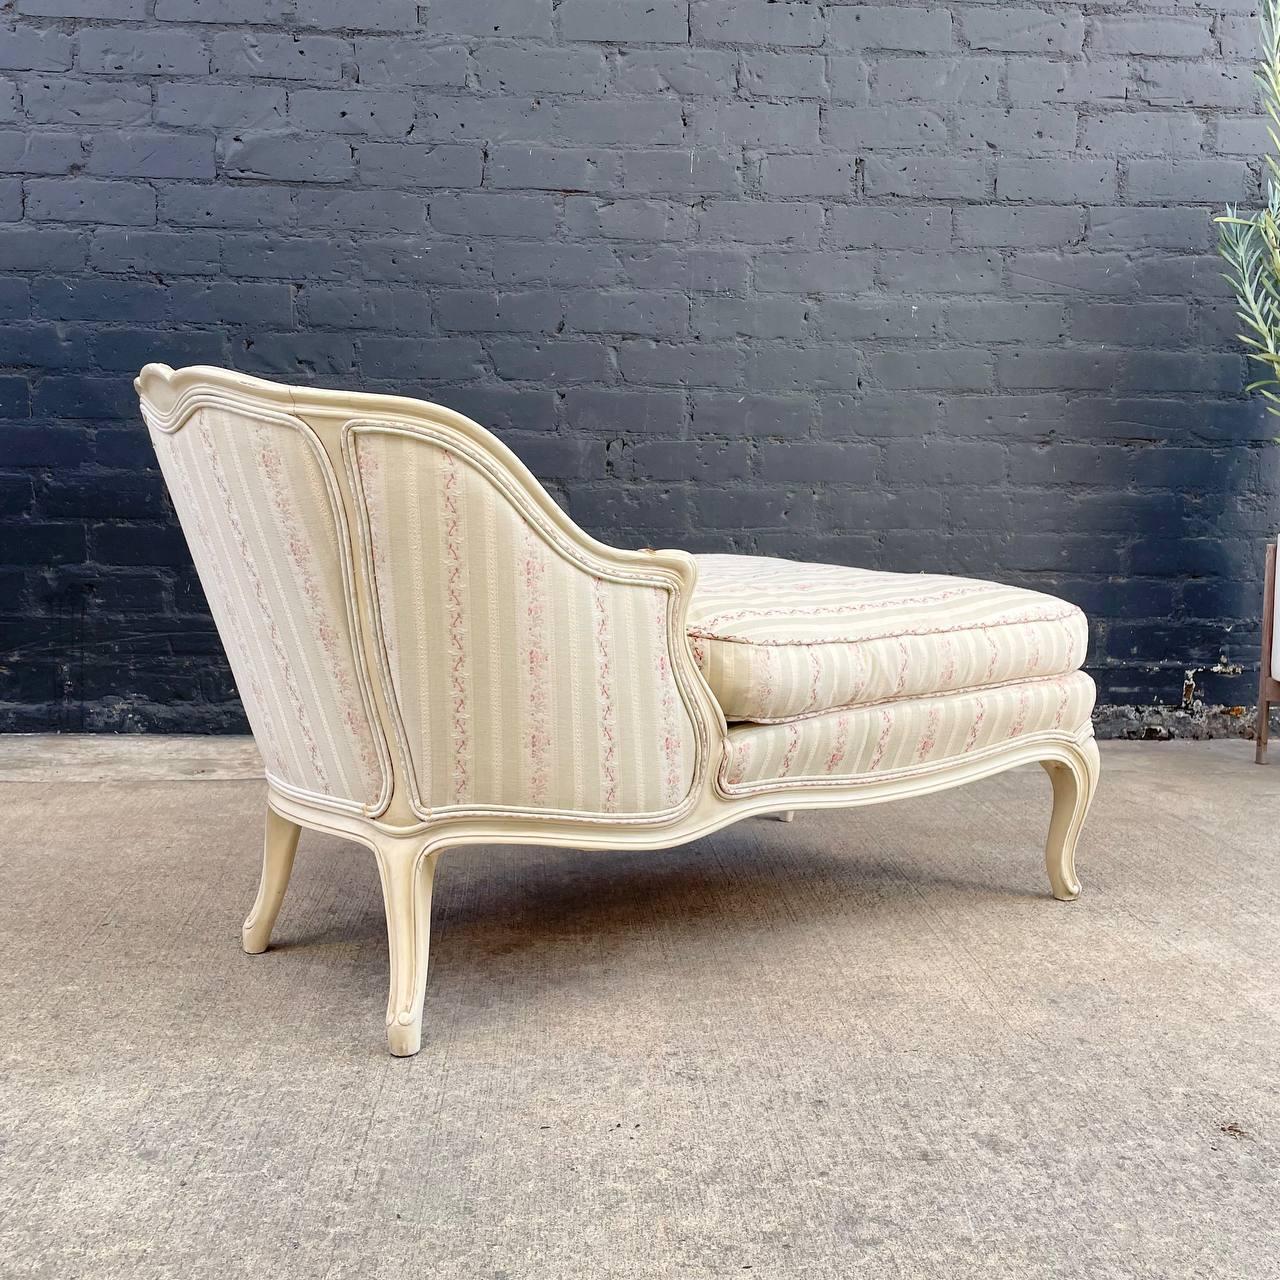 American Vintage French Provincial Style Chaise Lounge Chair For Sale